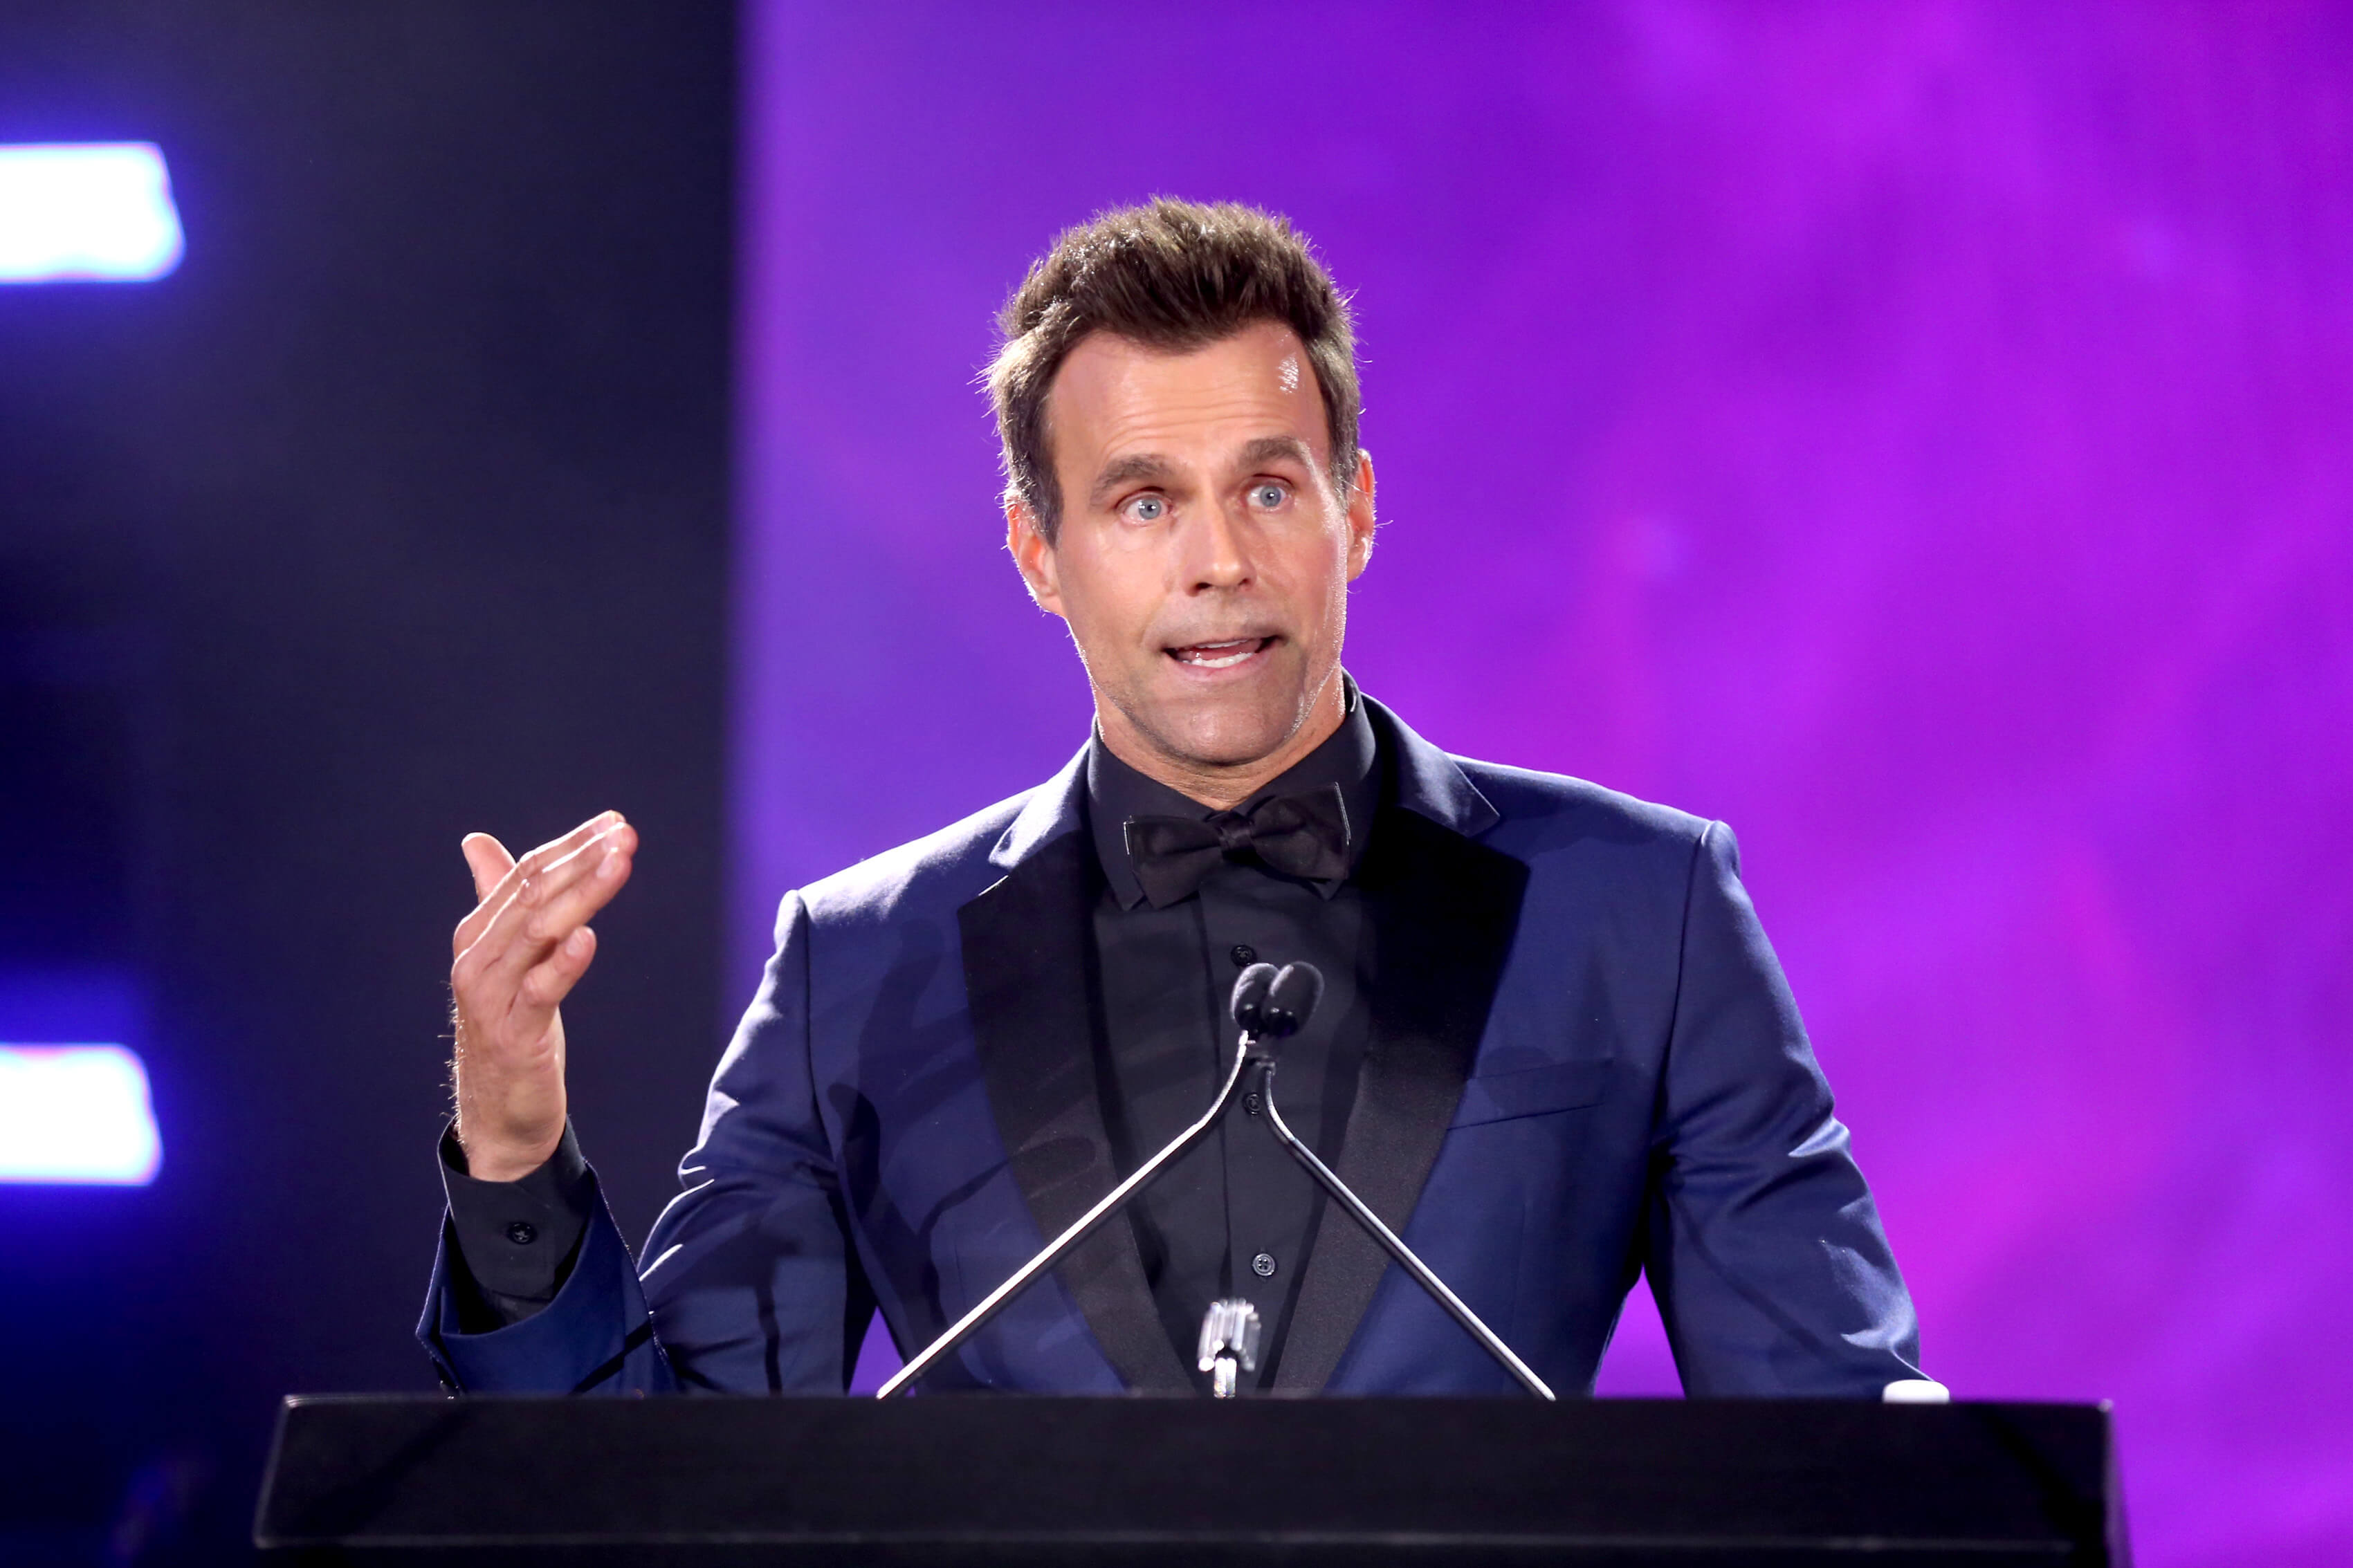 'General Hospital' Drew actor Cameron Mathison in a blue and black suit; speaking into a microphone podium.